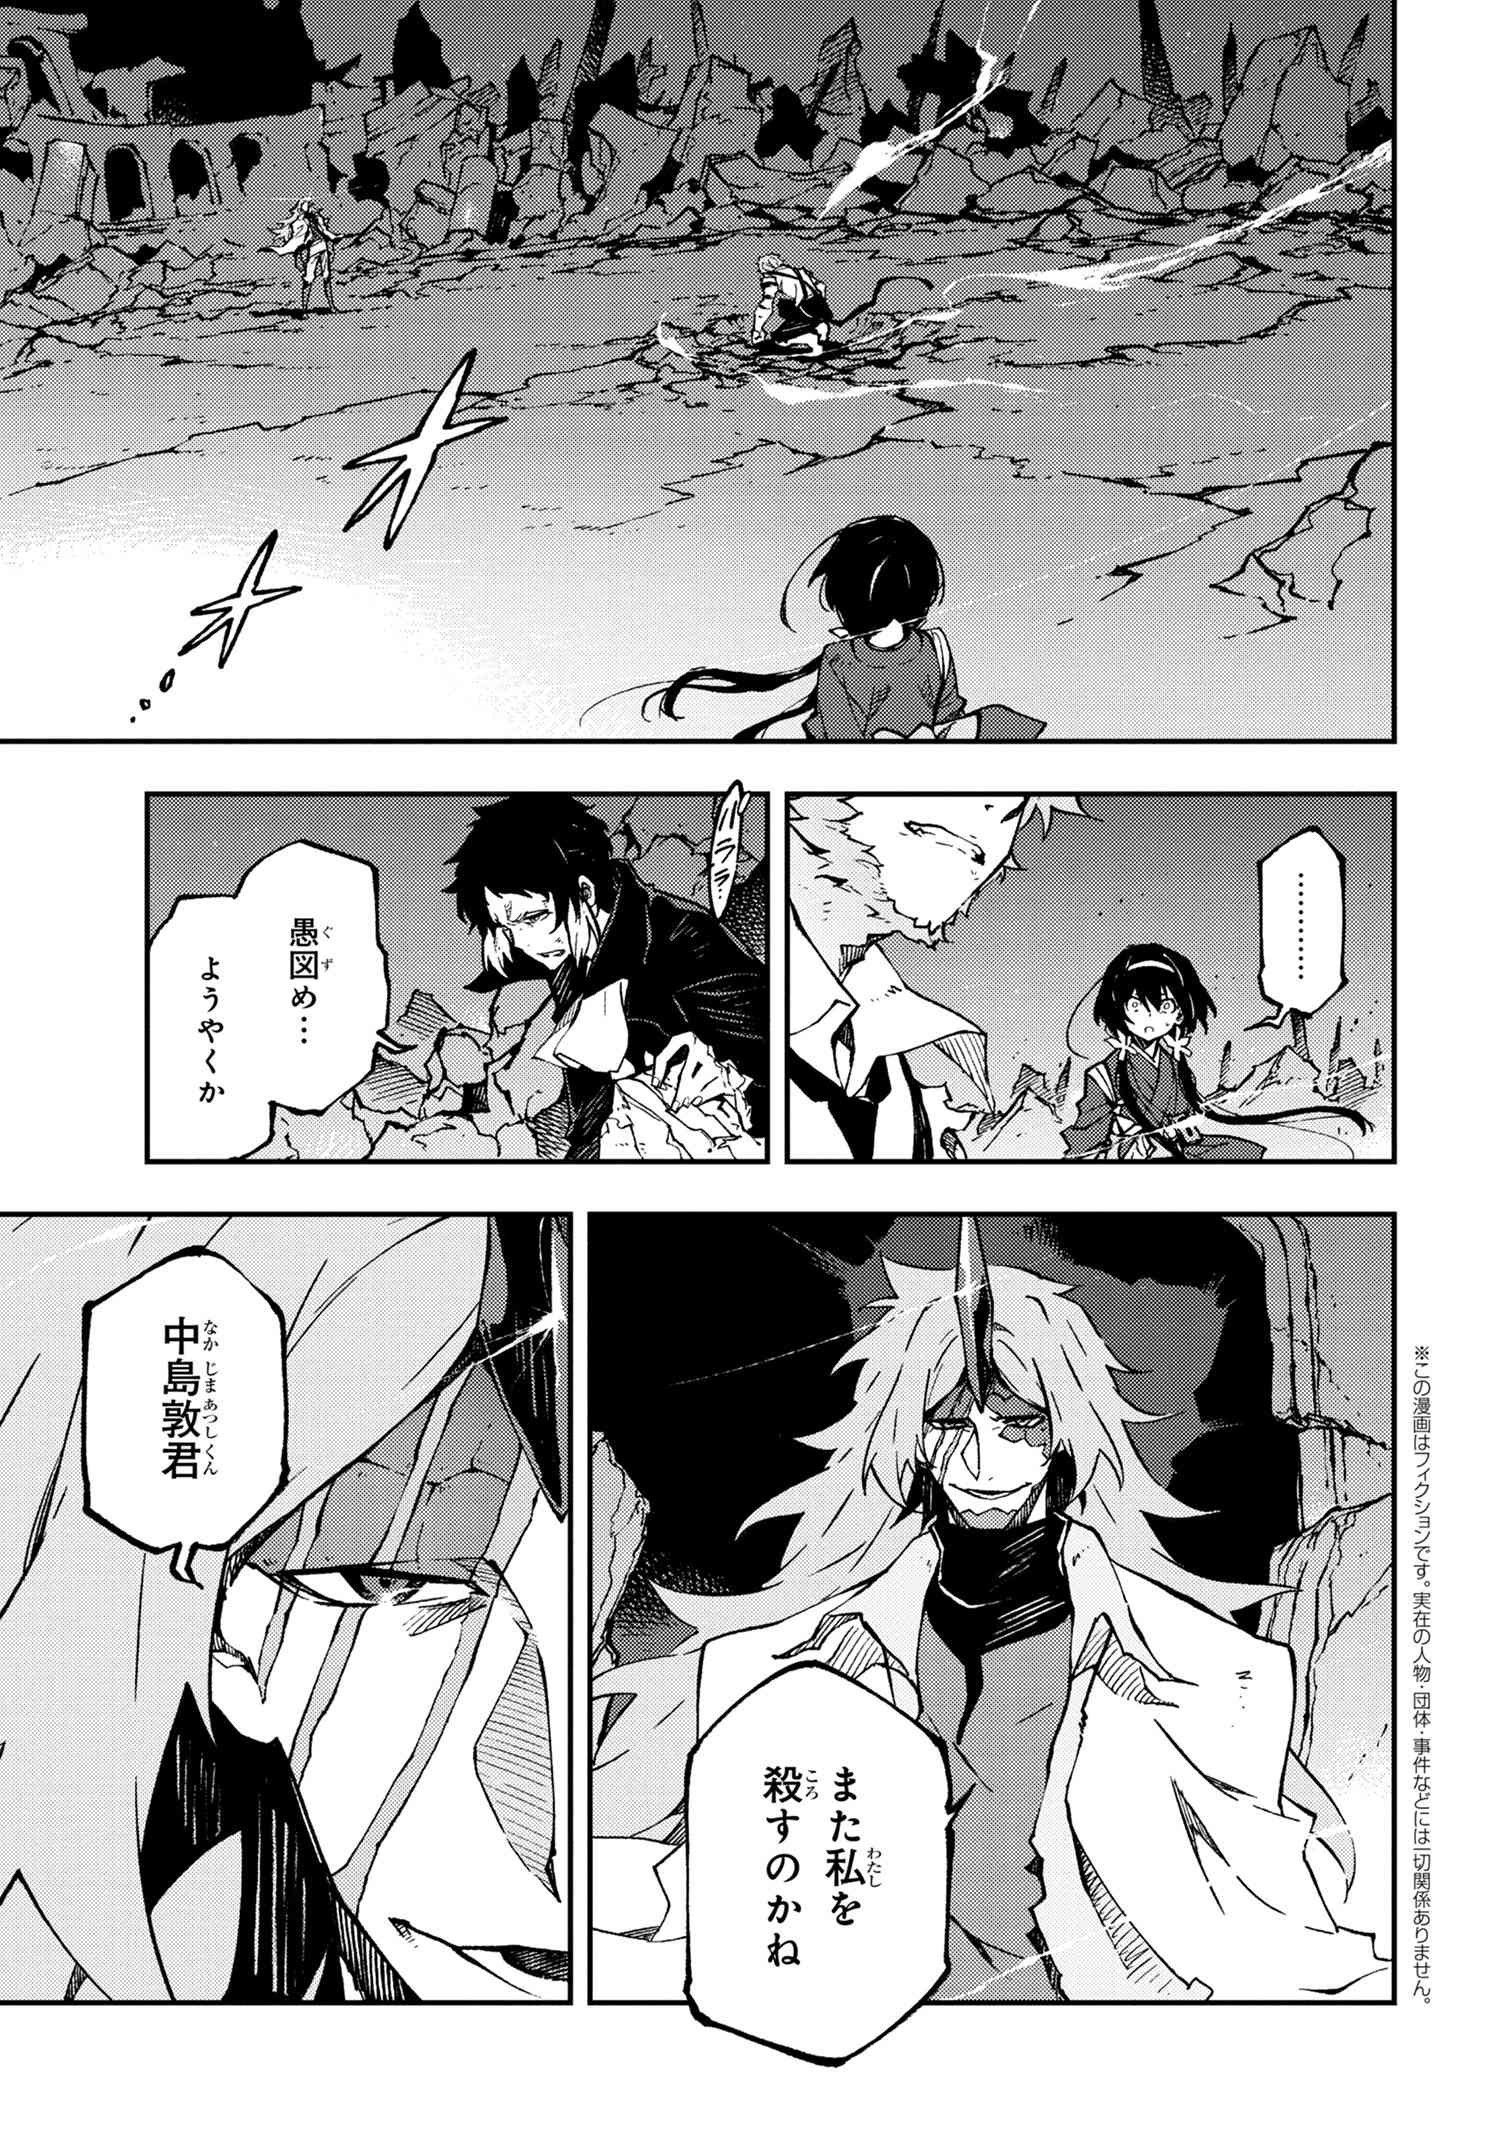 Bungou Stray Dogs: Dead Apple - Chapter 15-2 - Page 1